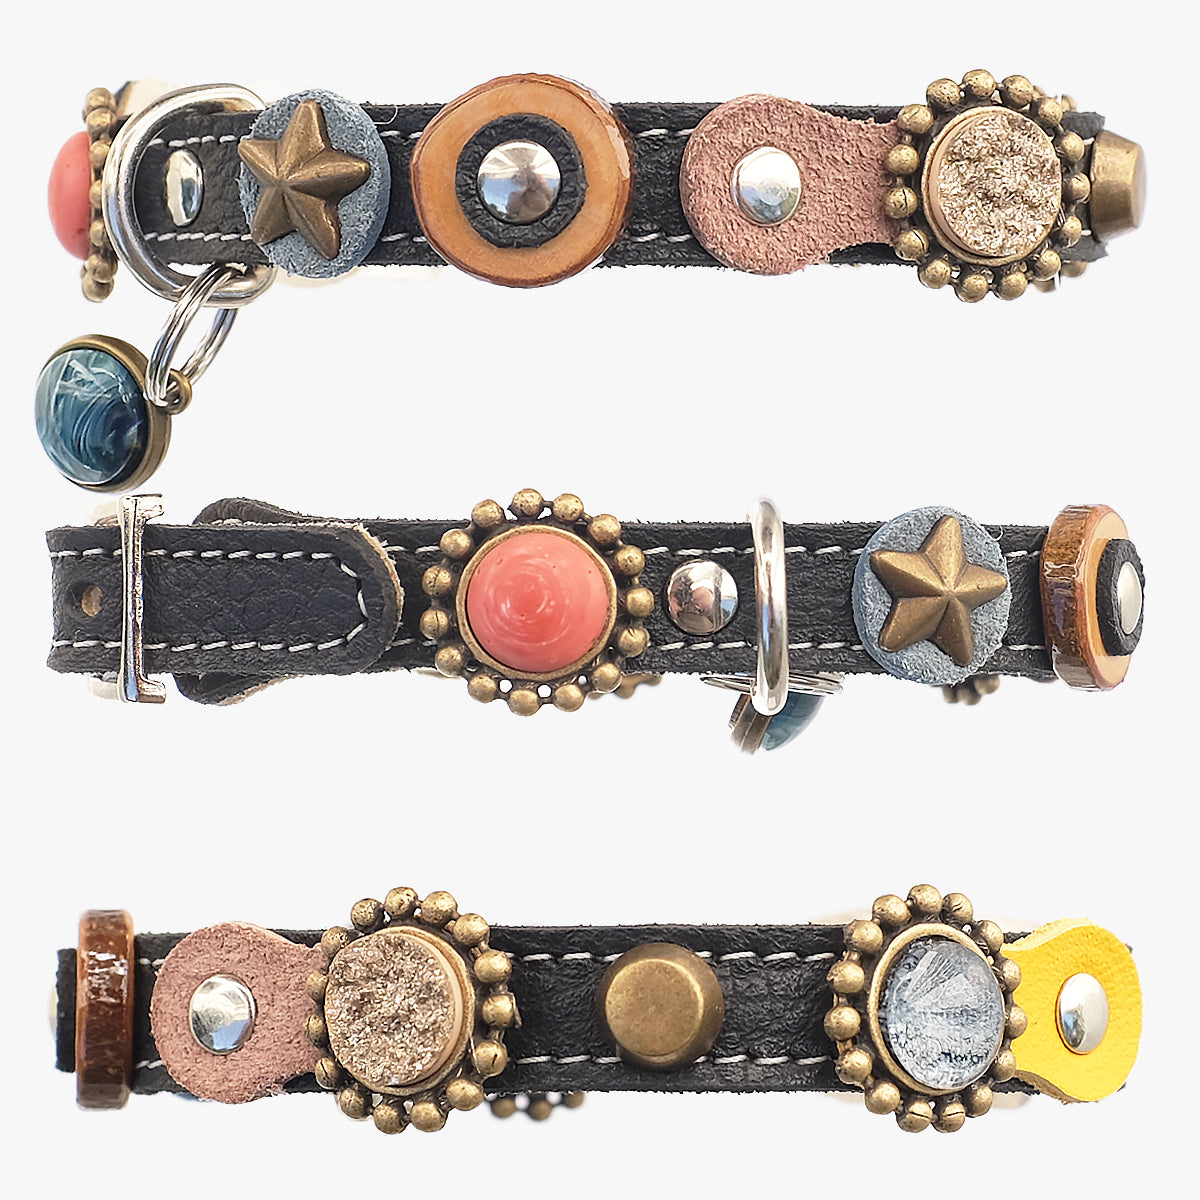 Superpipapo Black Leather Luxury Cat Collar, With Stars, Ornaments, Wood Discs & Patches | at Made Moggie